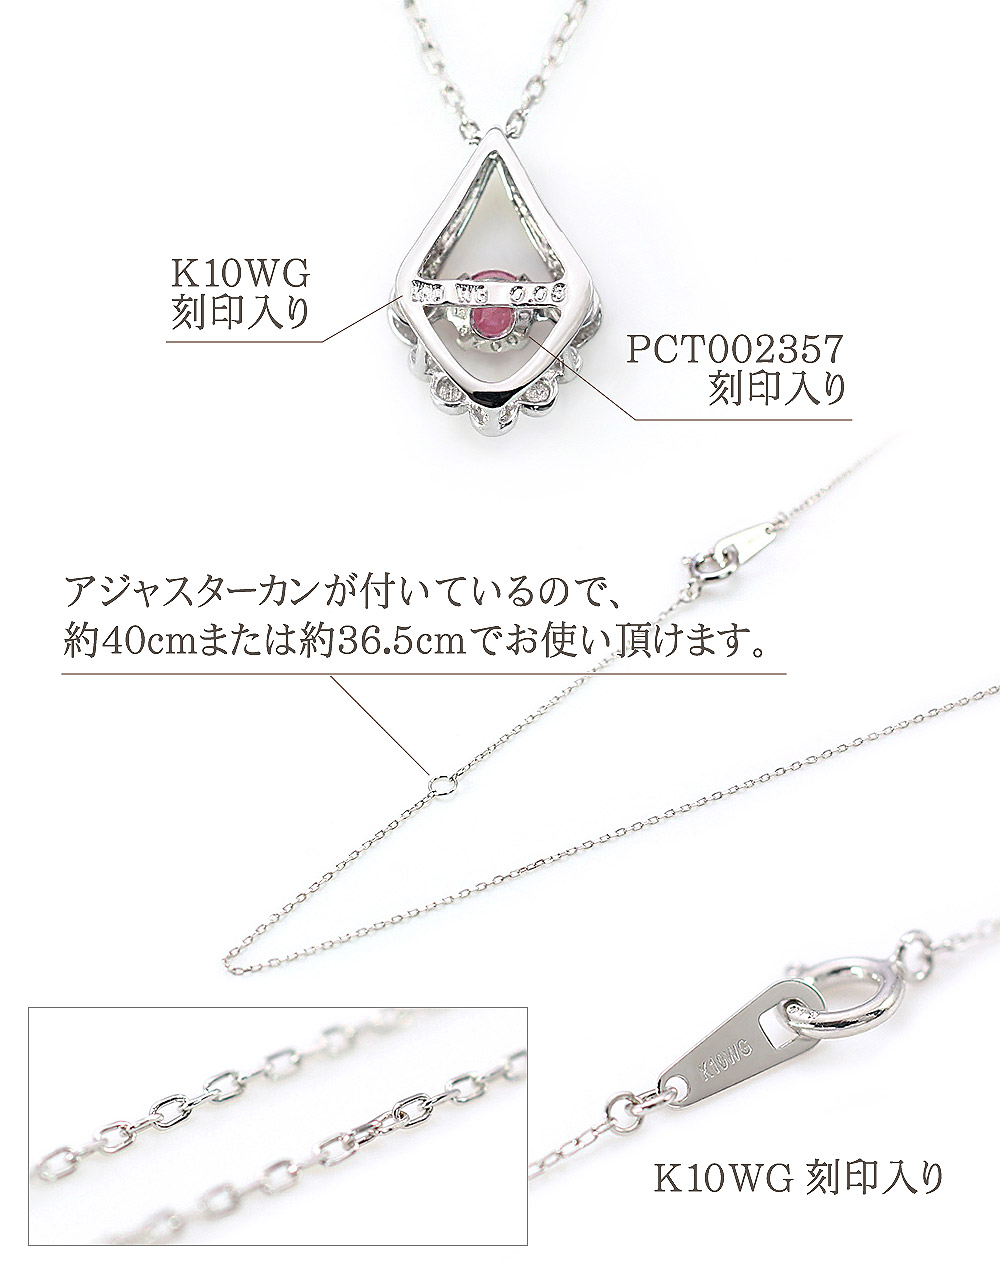 Jewelry ROLA ピンクトルマリン ネックレス